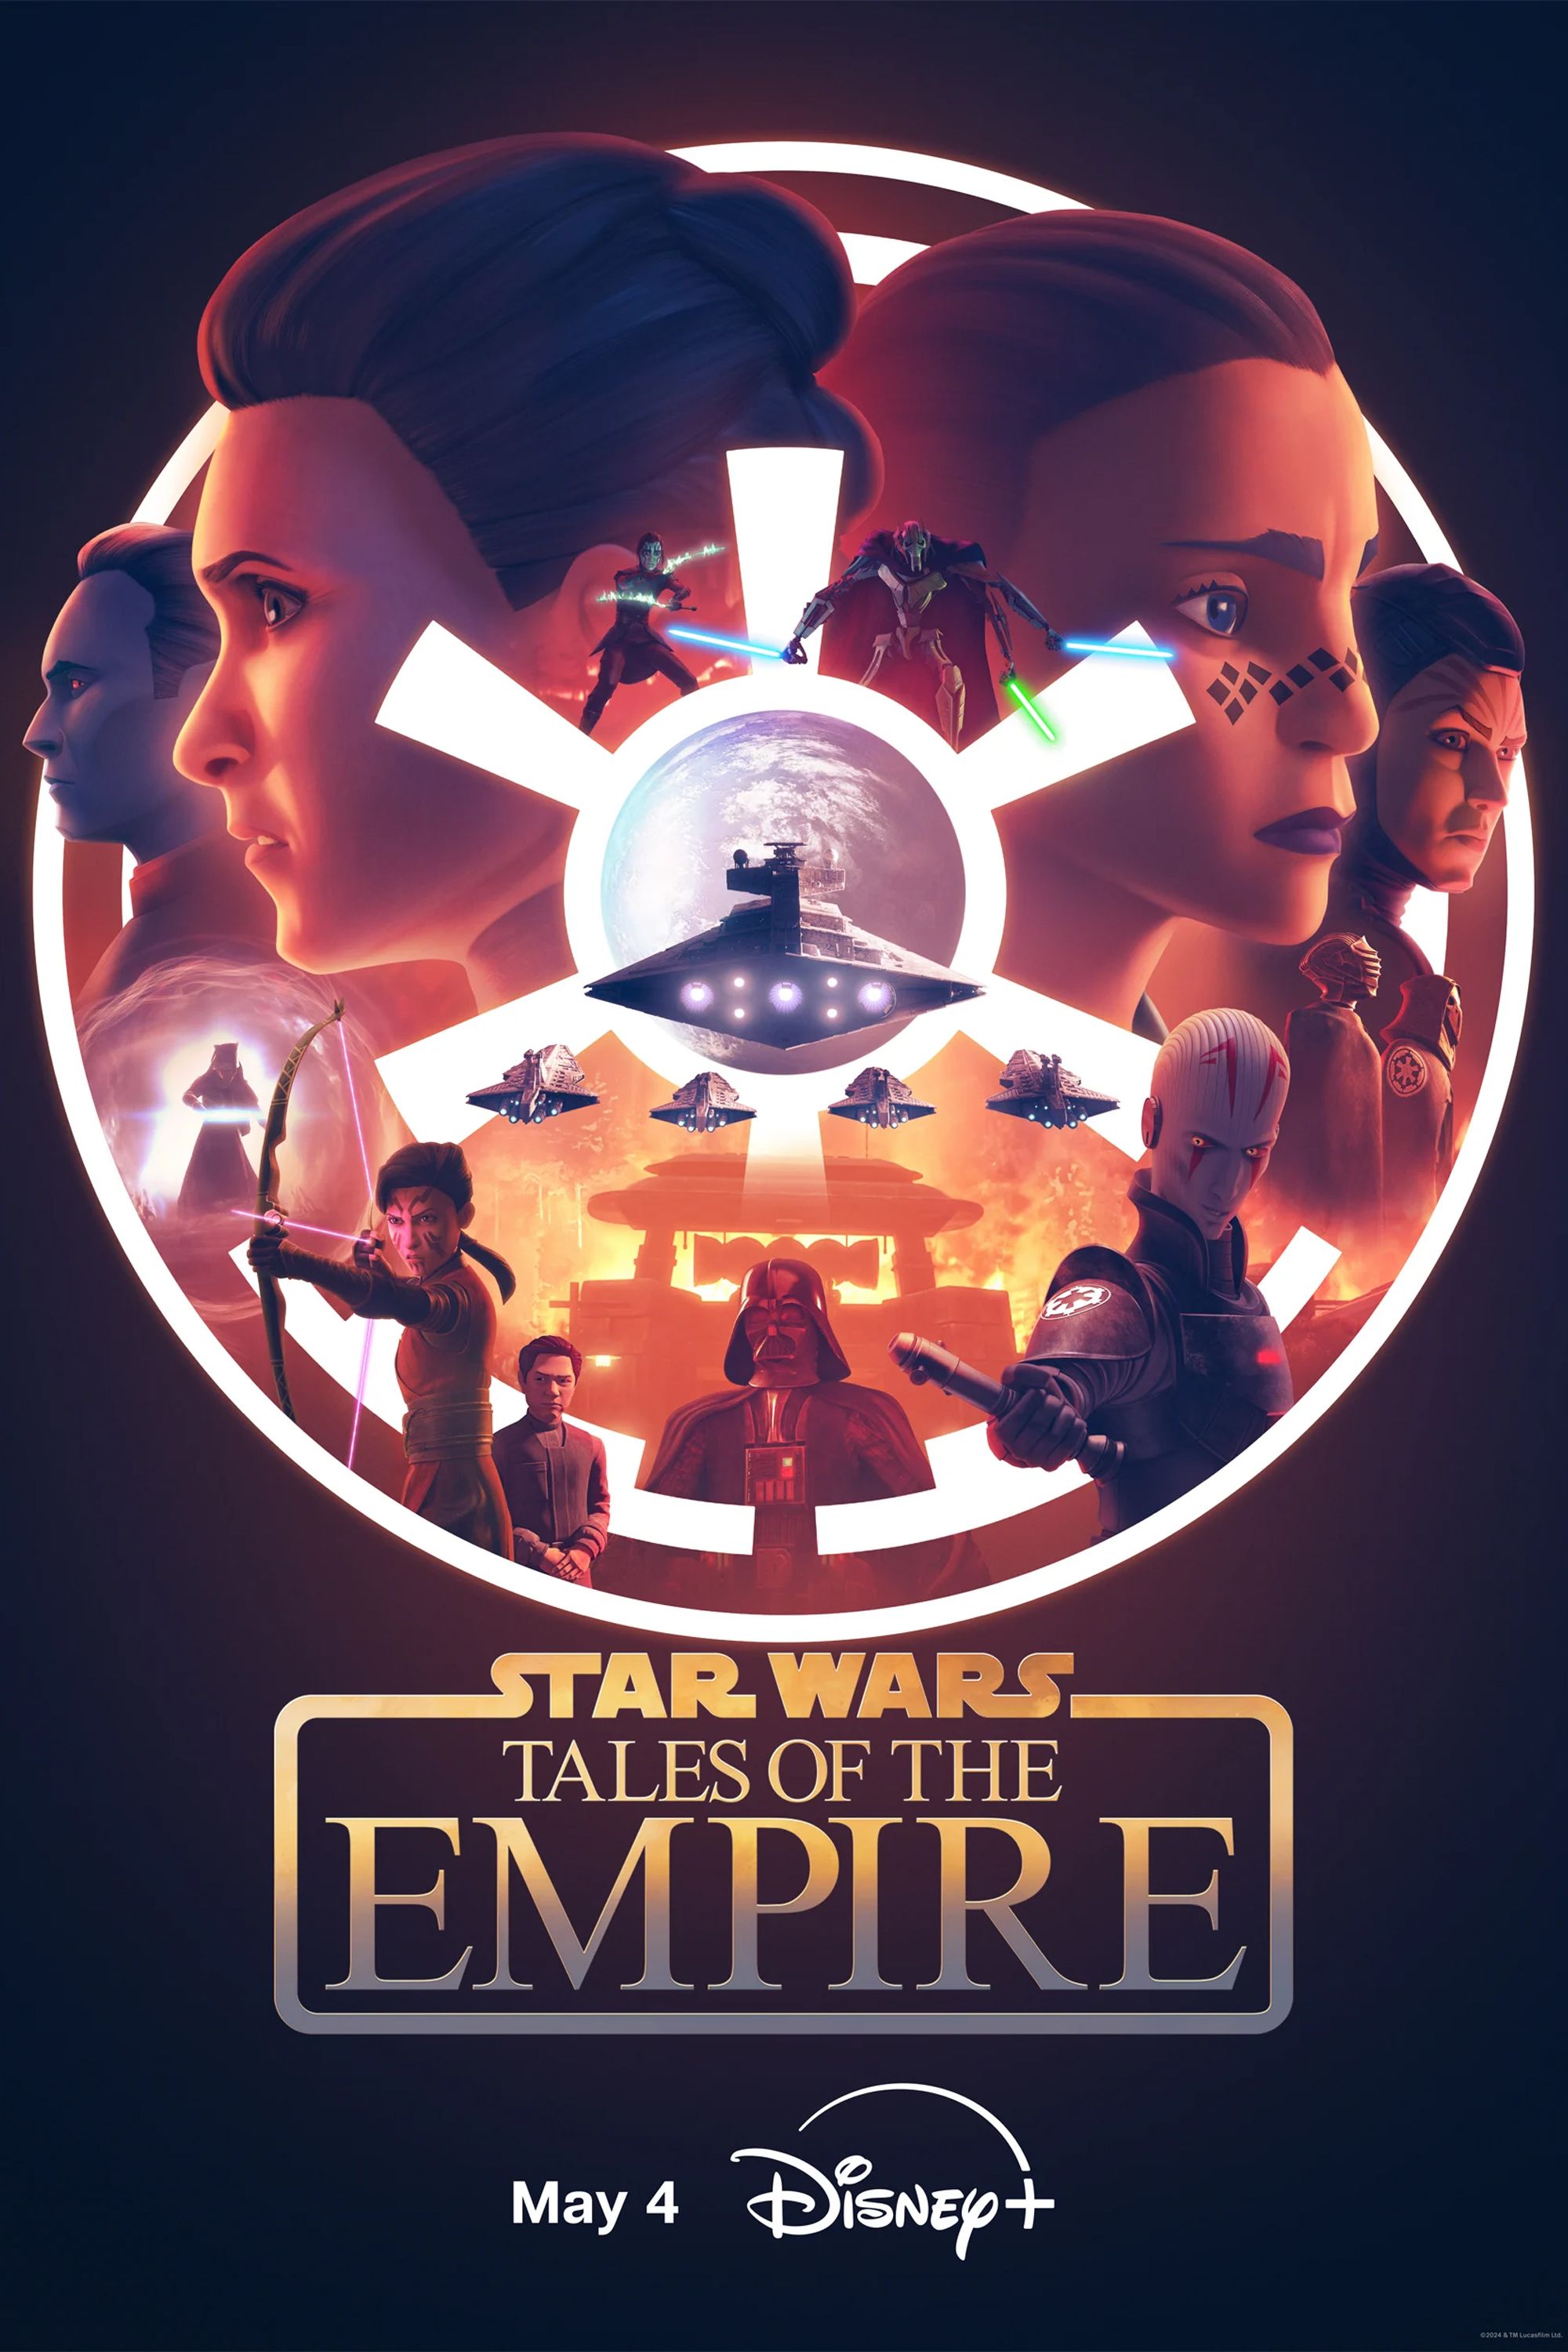 Star Wars Tales of the Empire Poster Showing Grand Admiral Thrawn, Ahsoka, Darth Vader, General Grievous, and Various Other Characters Inside the Imperial Logo